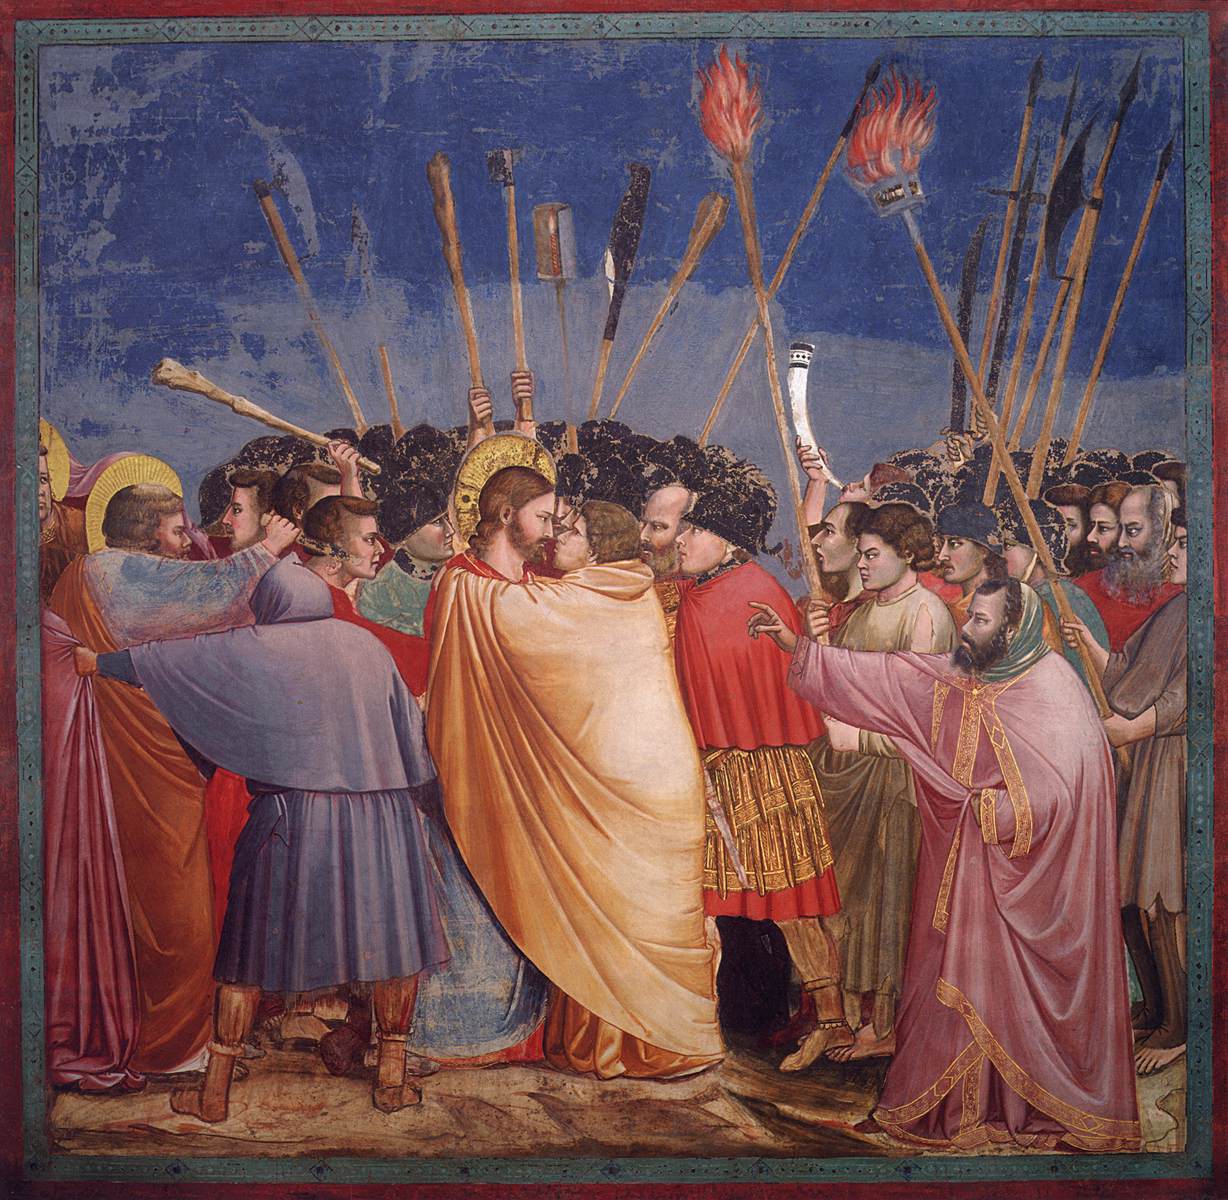 No 31 Scenes from the Life of Christ: 15 The Arrest of Christ (Kiss of Judas)